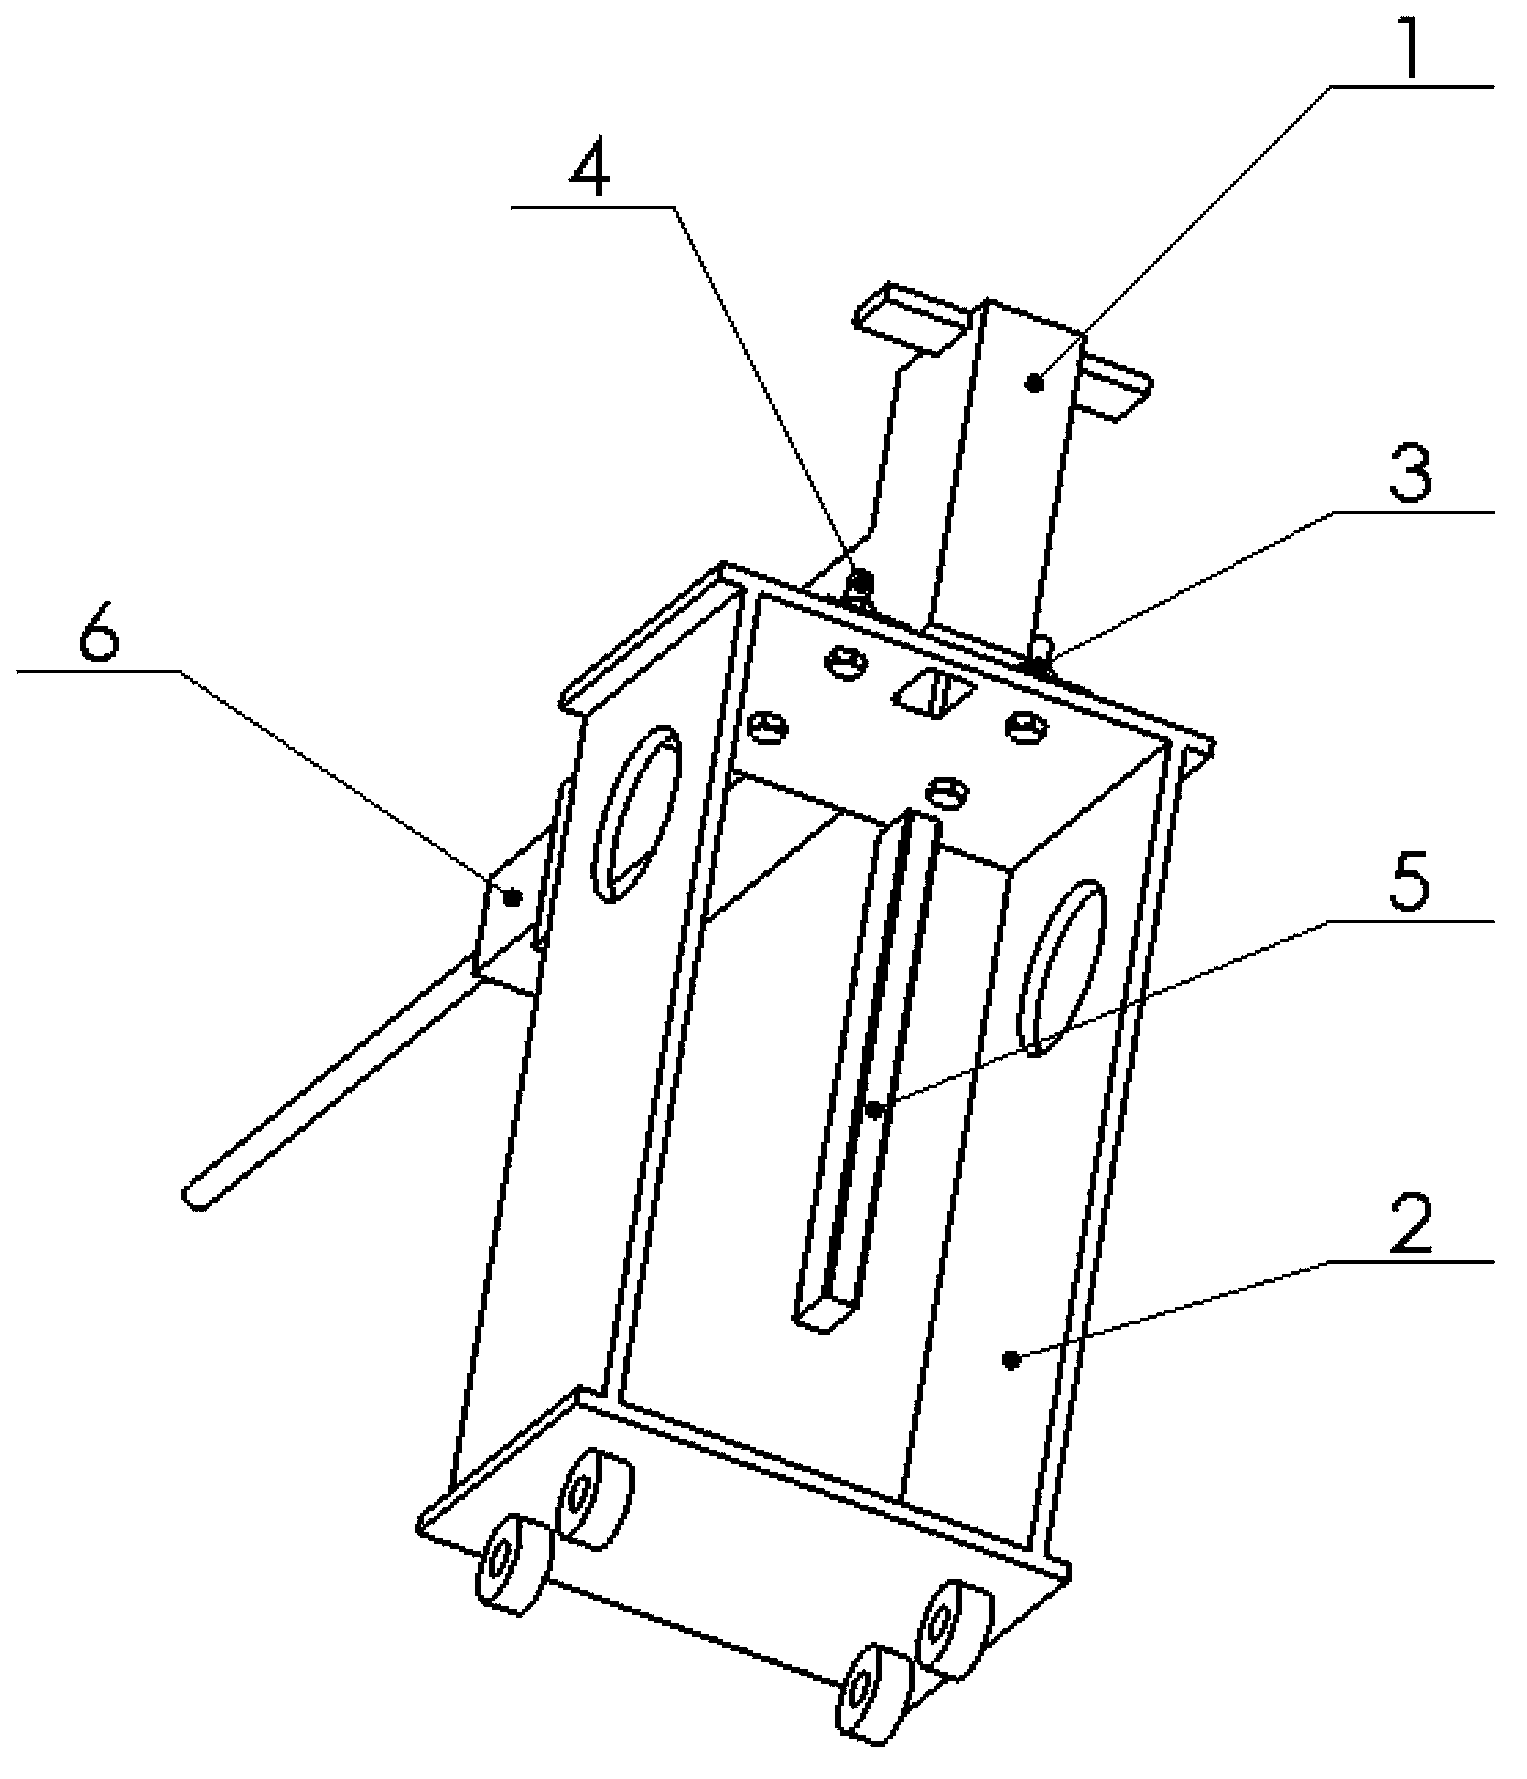 Permanent magnet assembly fixture for large permanent magnet direct-driven wind generator and assembly method of permanent magnet assembly fixture